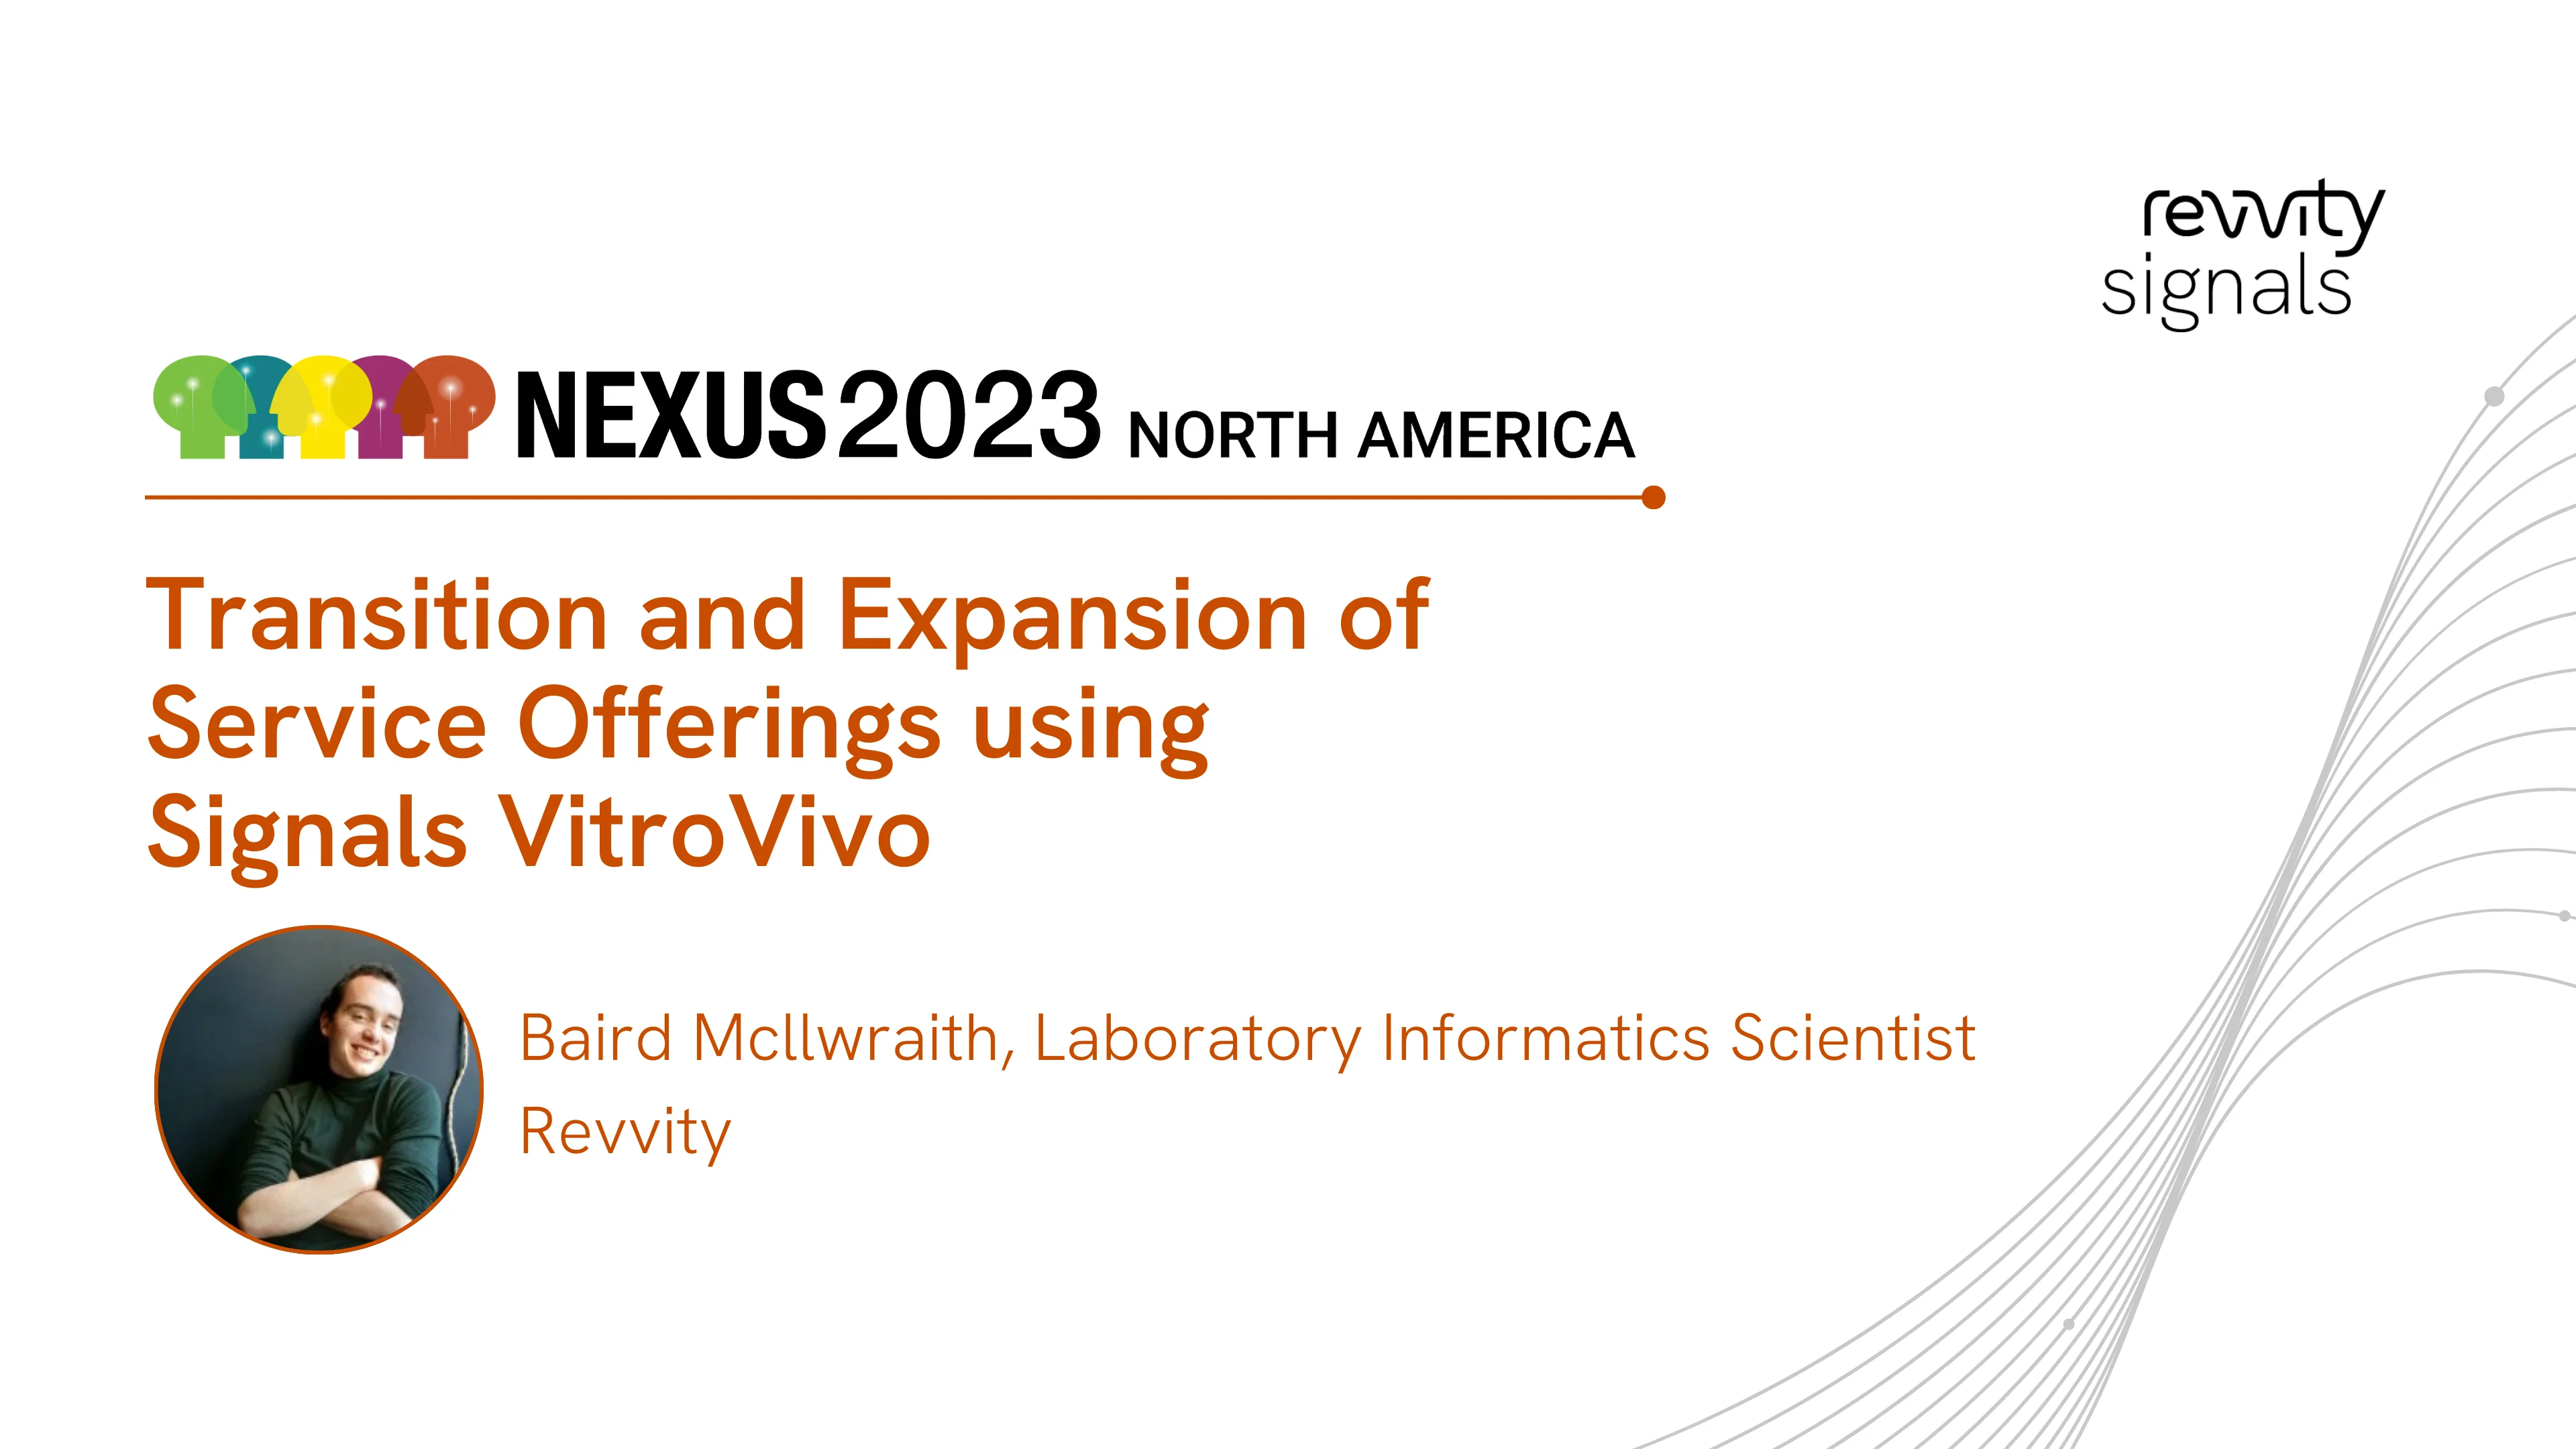 Watch Day 2, NA NEXUS 2023 - Transition and Expansion of Service Offerings using Signals VitroVivo on Vimeo.